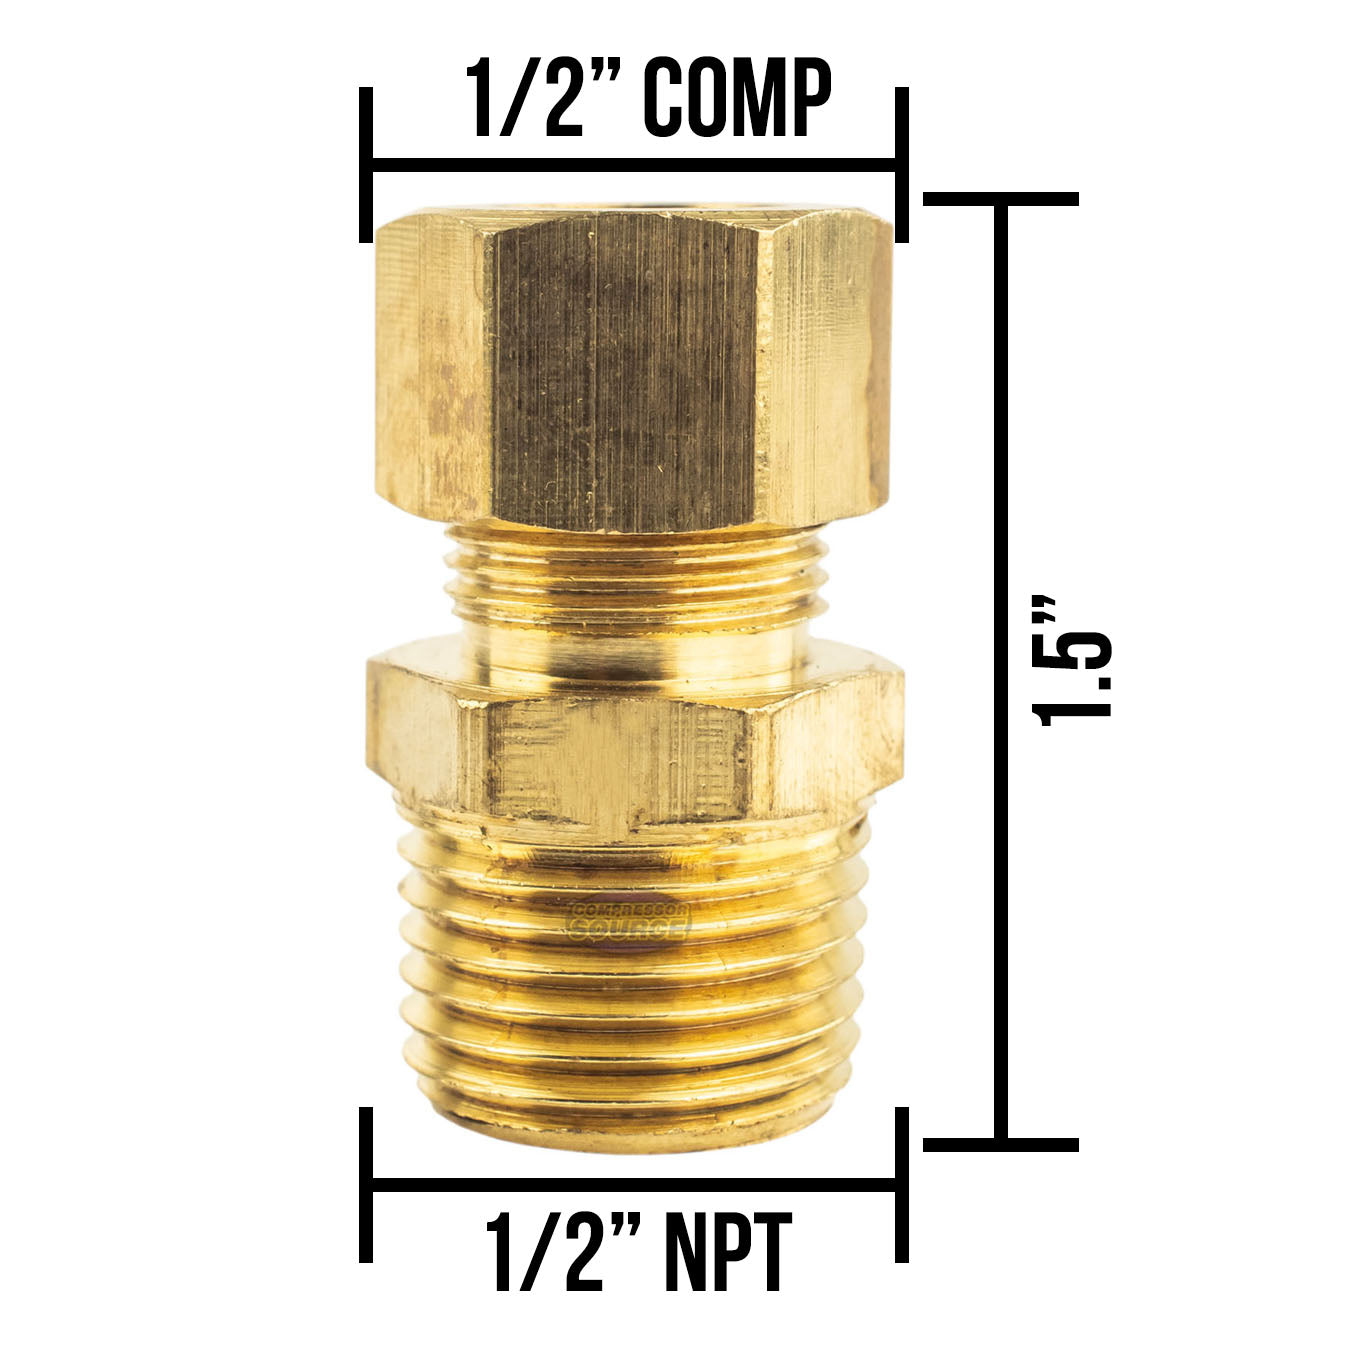 1/2" OD x 1/2" Male NPT Connector Brass Compression Fitting for 1/2" OD Tube